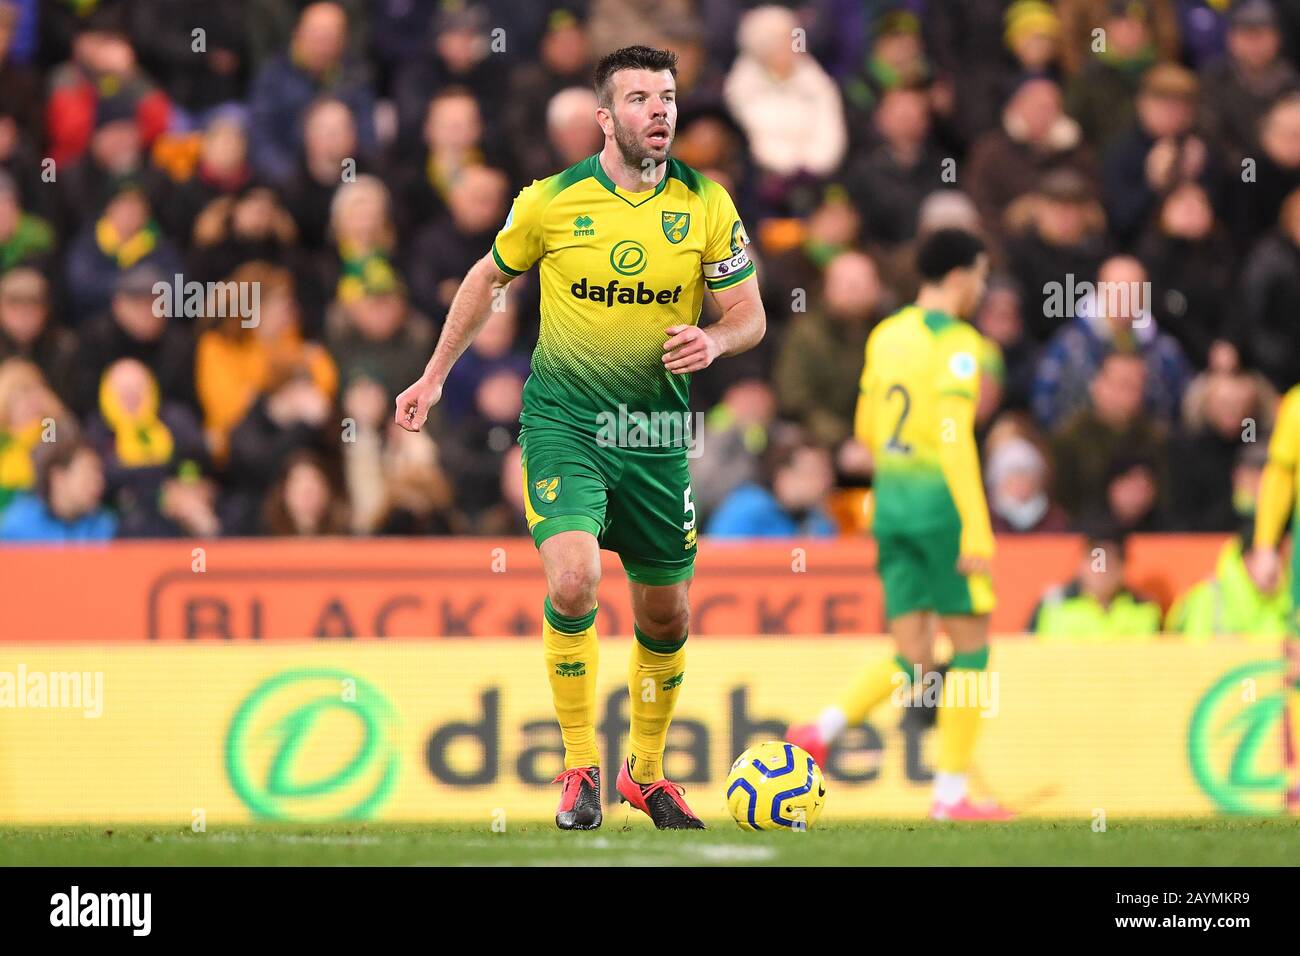 Norwich, UK. 15th Feb, 2020.  Grant Hanley (5) of Norwich City during the Premier League match between Norwich City and Liverpool at Carrow Road, Norwich on Saturday 15th February 2020. (Credit: Jon Hobley | MI News)  Photograph may only be used for newspaper and/or magazine editorial purposes, license required for commercial use Credit: MI News & Sport /Alamy Live News Stock Photo